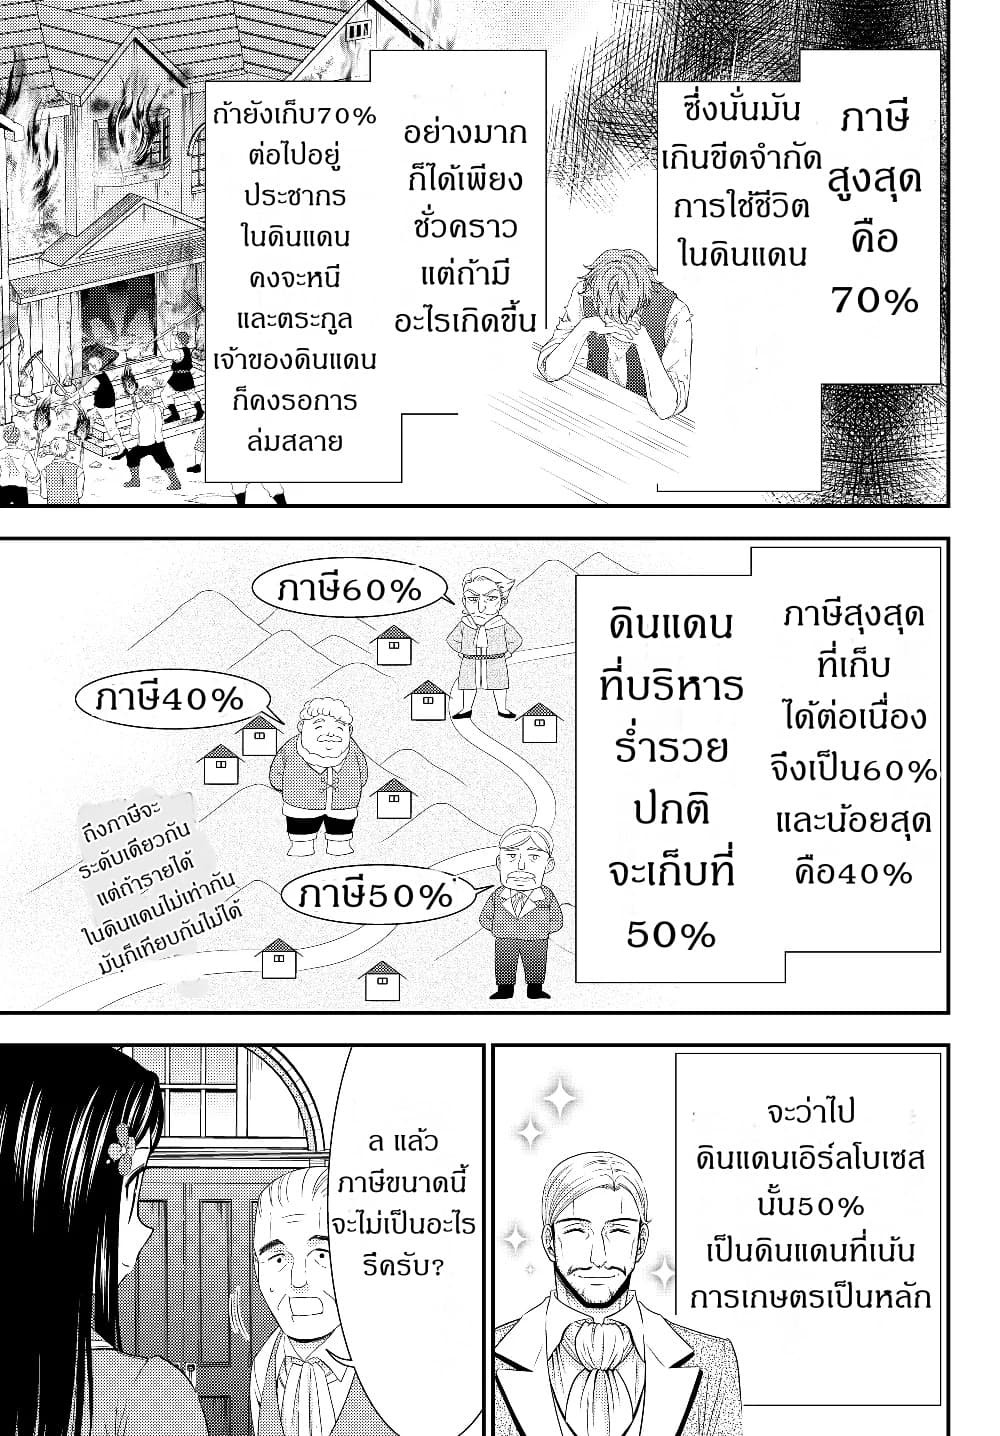 Saving 80,000 Gold Coins in the Different World for My Old Age ต้มตุ๋นต่างโลก